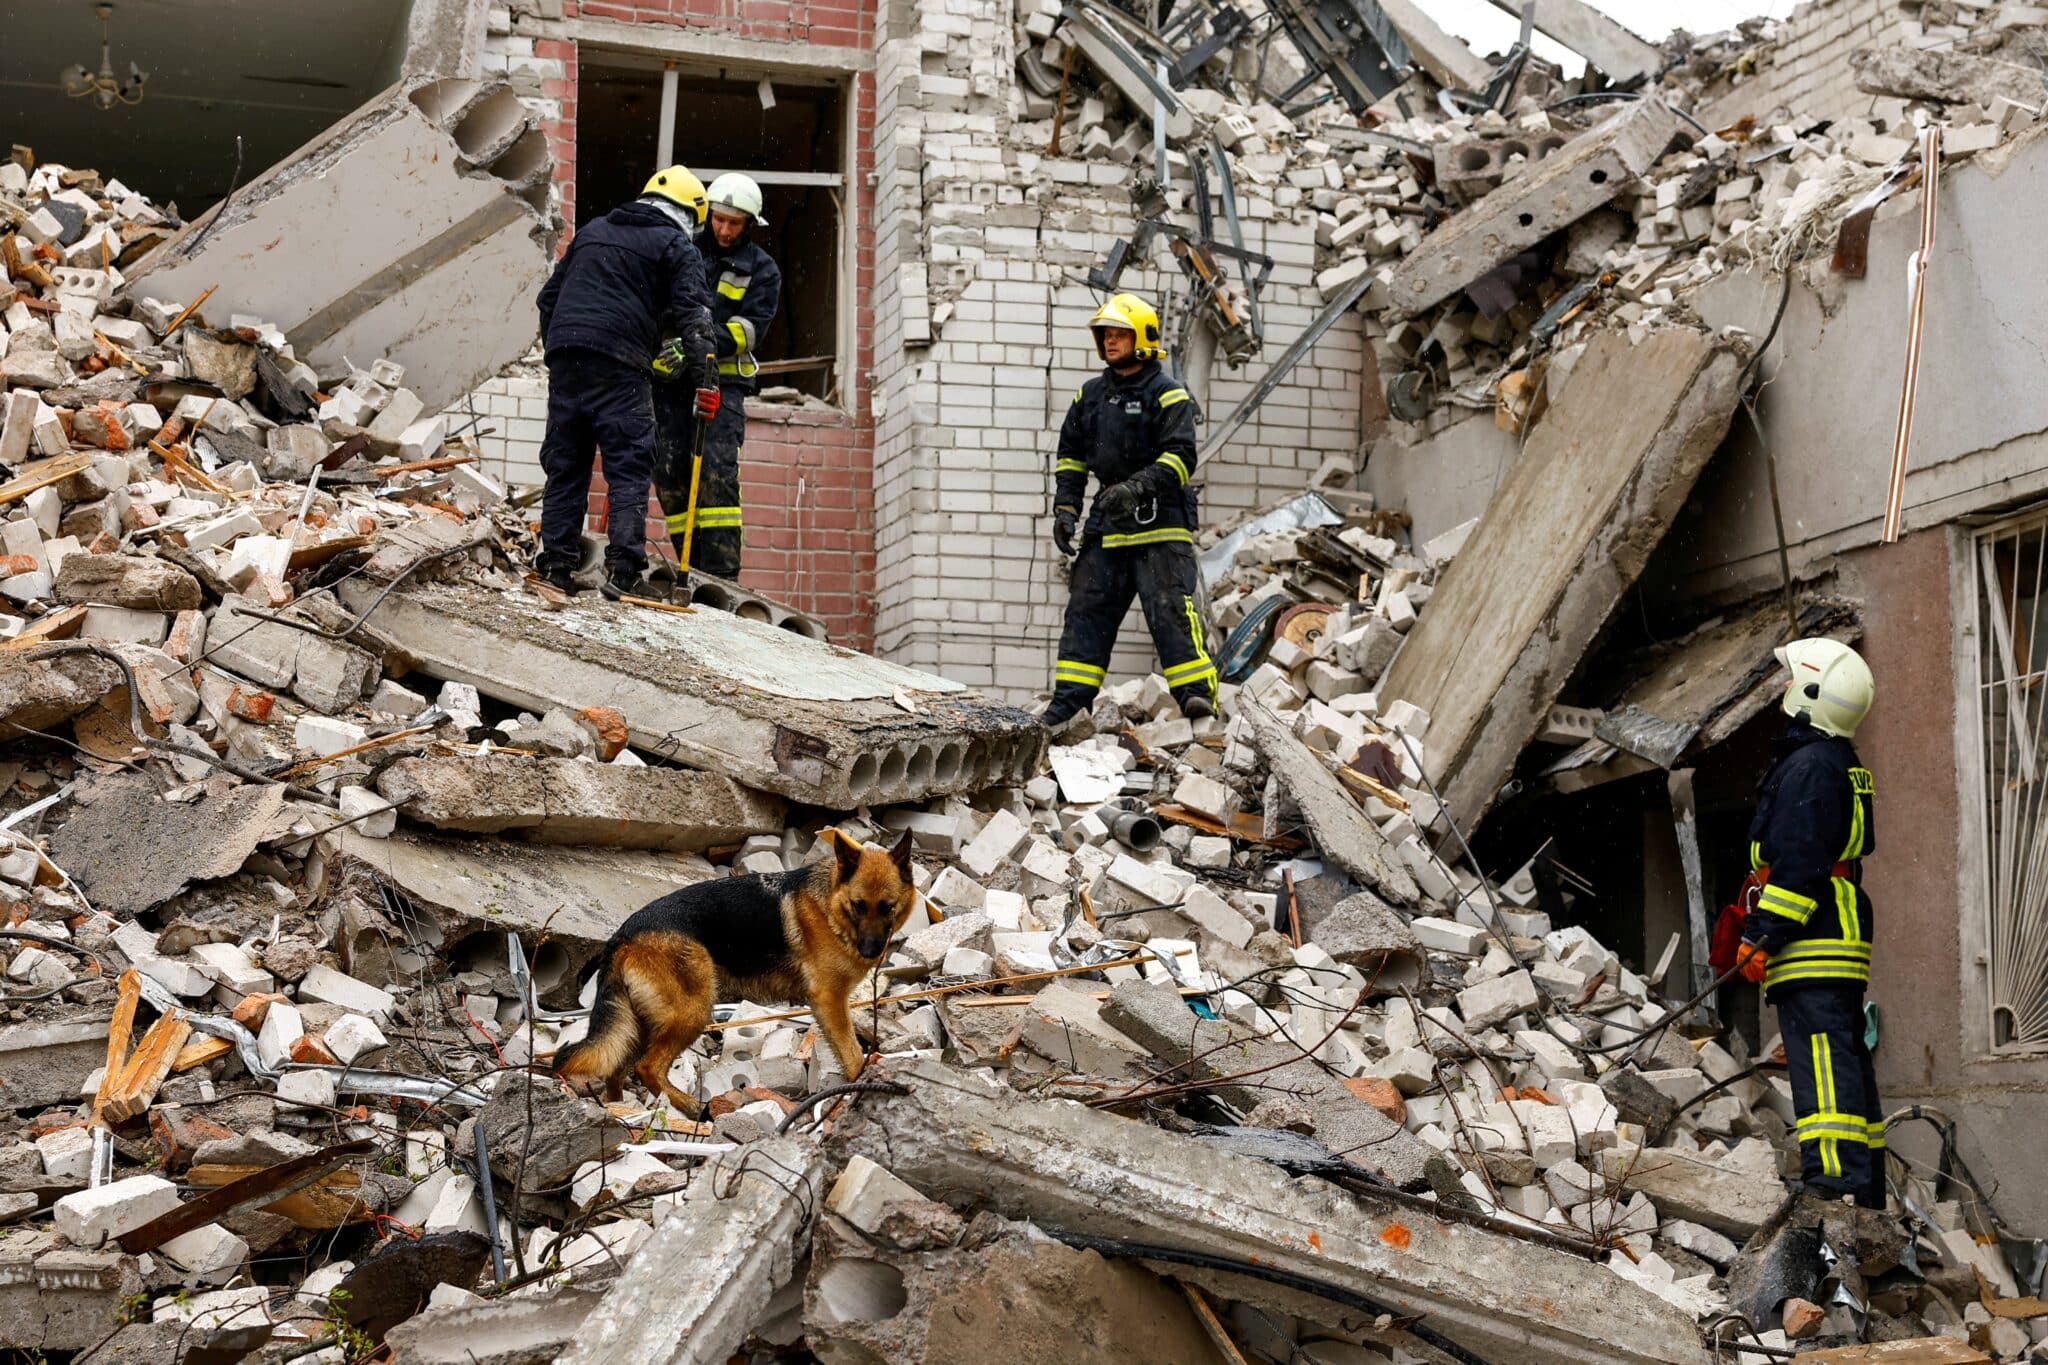 rescuers-in-ukraine-stand-on-rubble-from-collapsed-building-following-Russian-airstrike